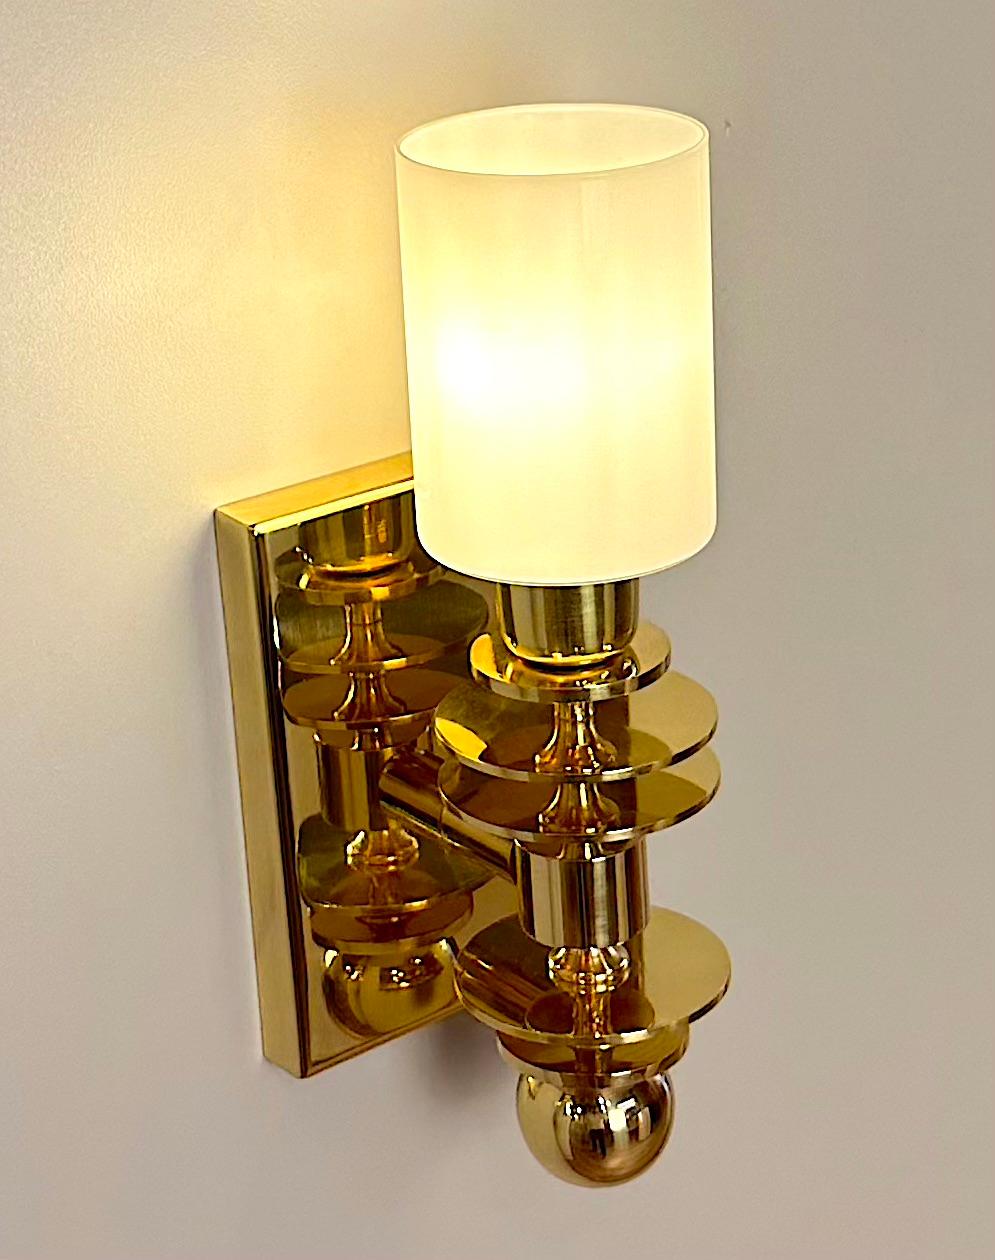 Marsala Brass Wall Sconce Mid-Century Modern Lighting In New Condition For Sale In İstiklal, TR